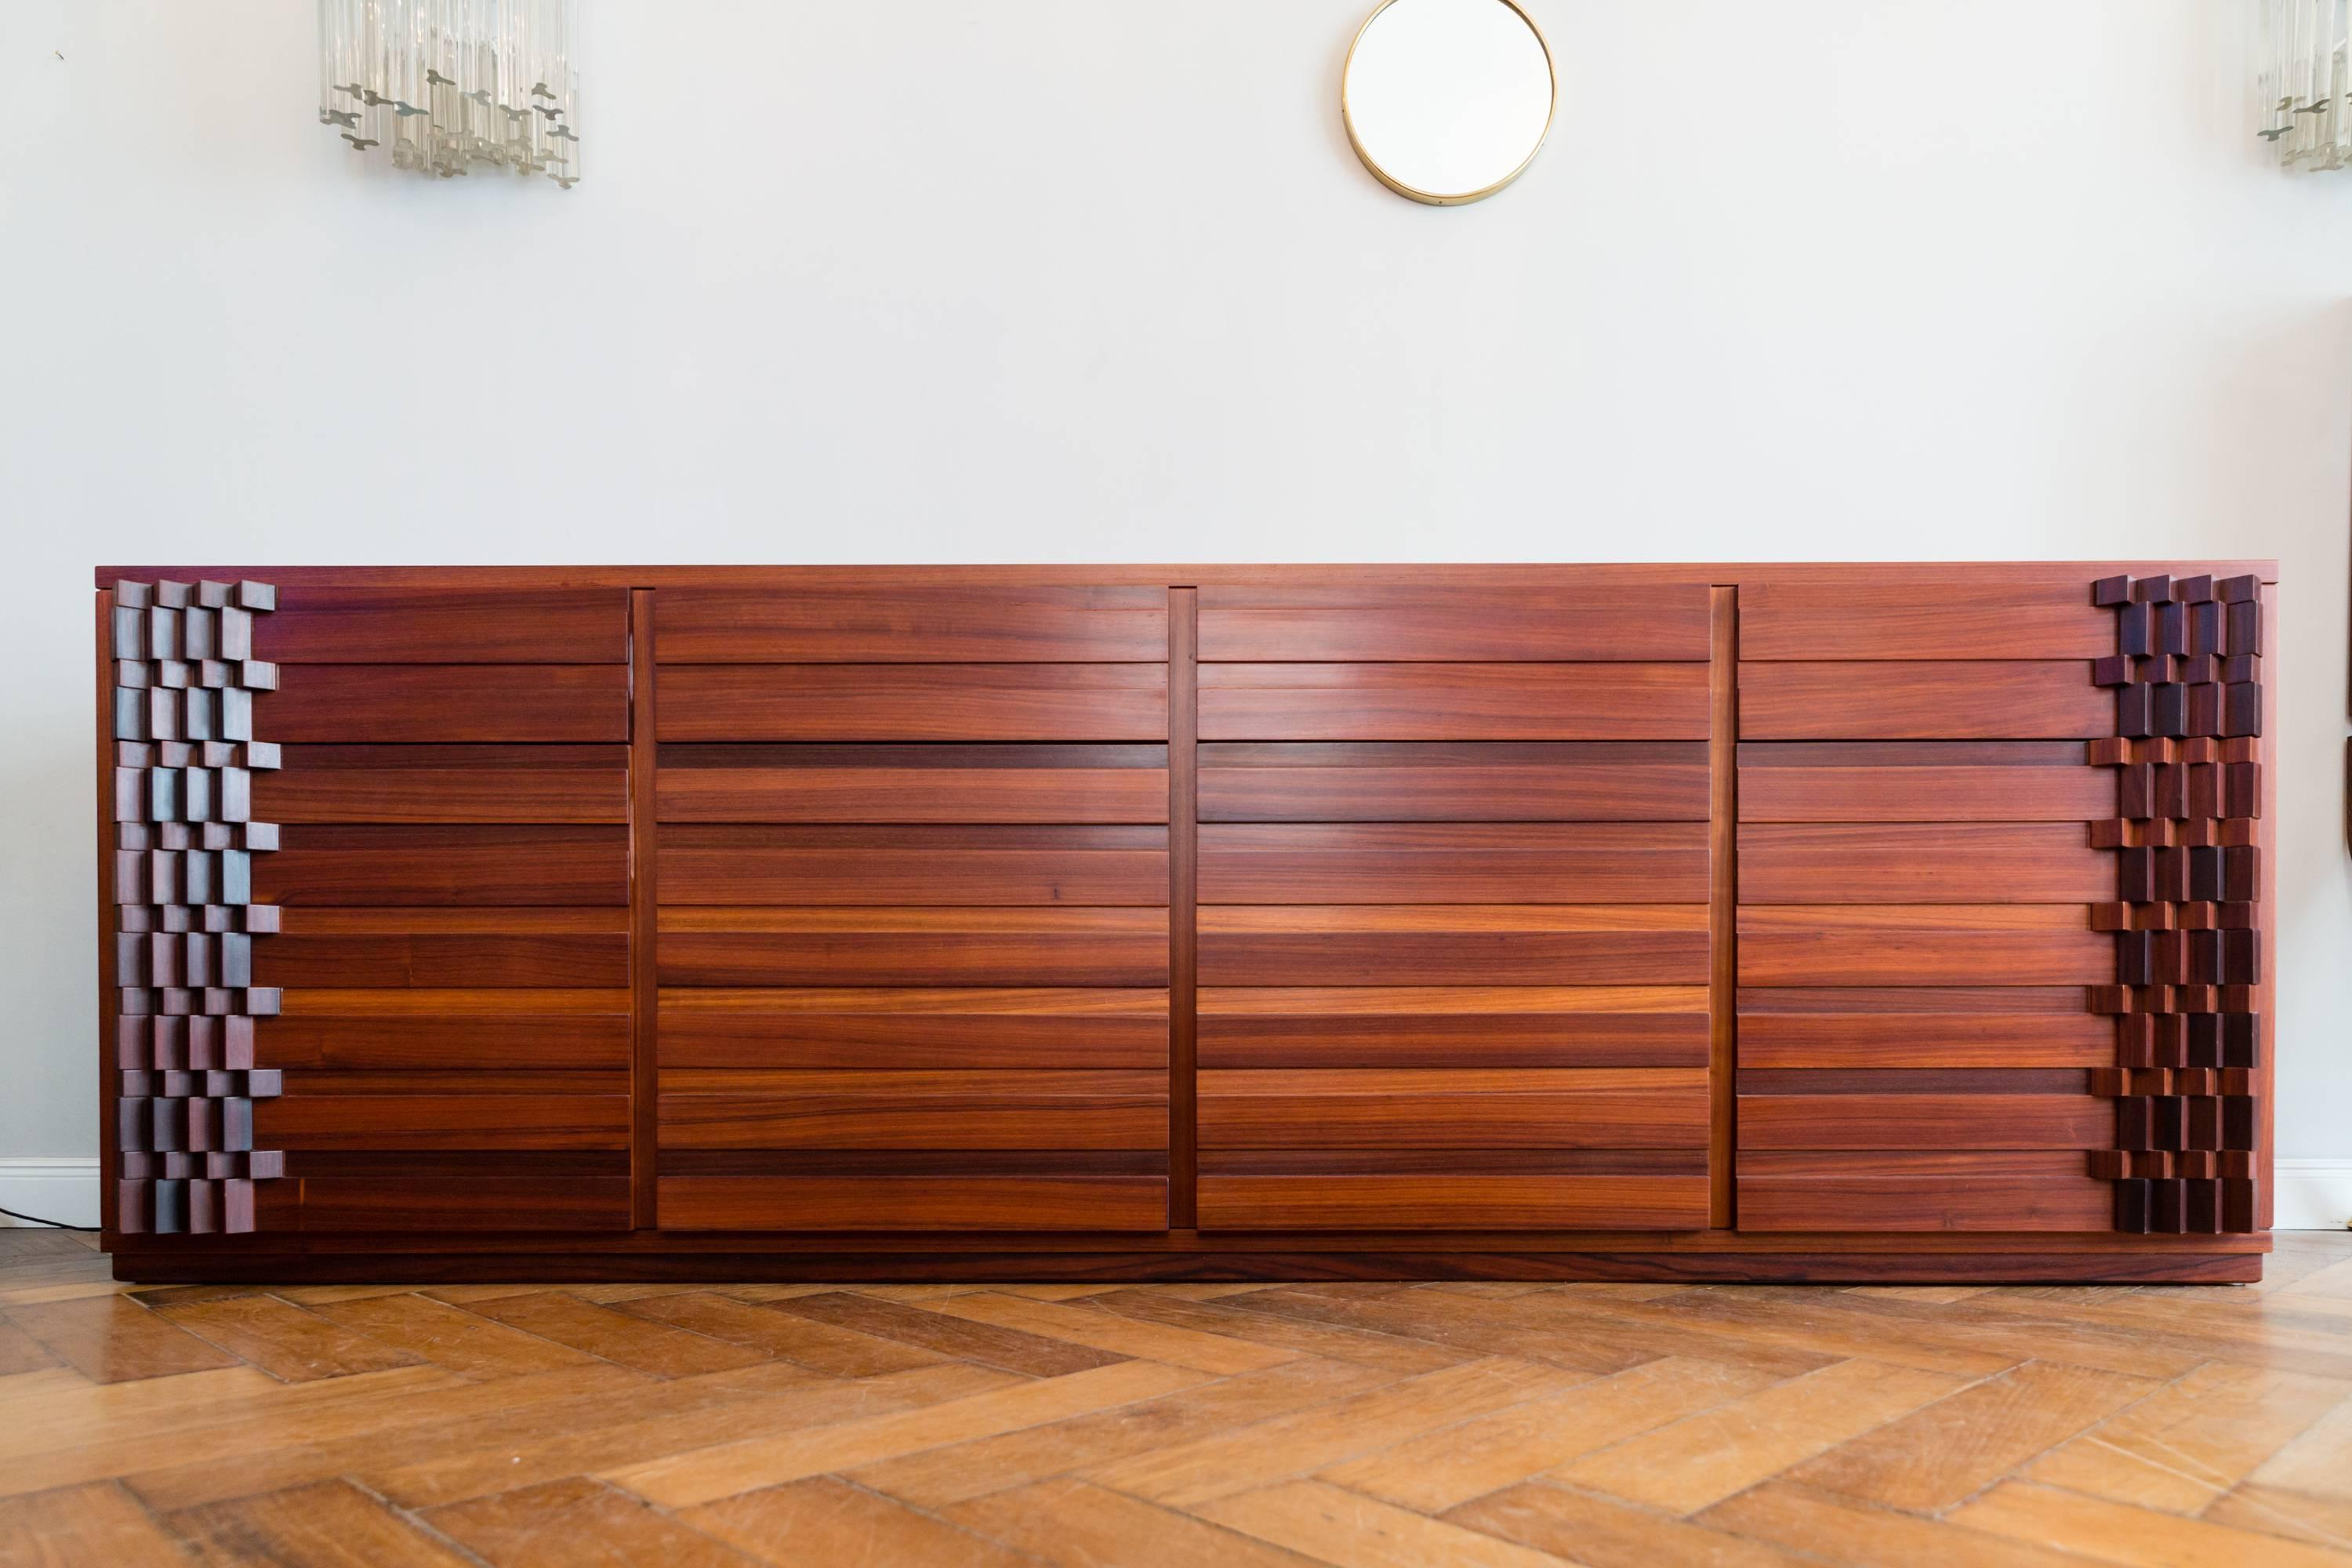 Luciano Frigerio large sideboard mod. diamond
Laminated lamellar wood in paduk wood, solid paduk wood.
Frigerio execution of Desio, circa 1968, Length 242 cm, height 80 cm, depth 55 cm.
Four drawers, four doors, four shelves, very solid quality.